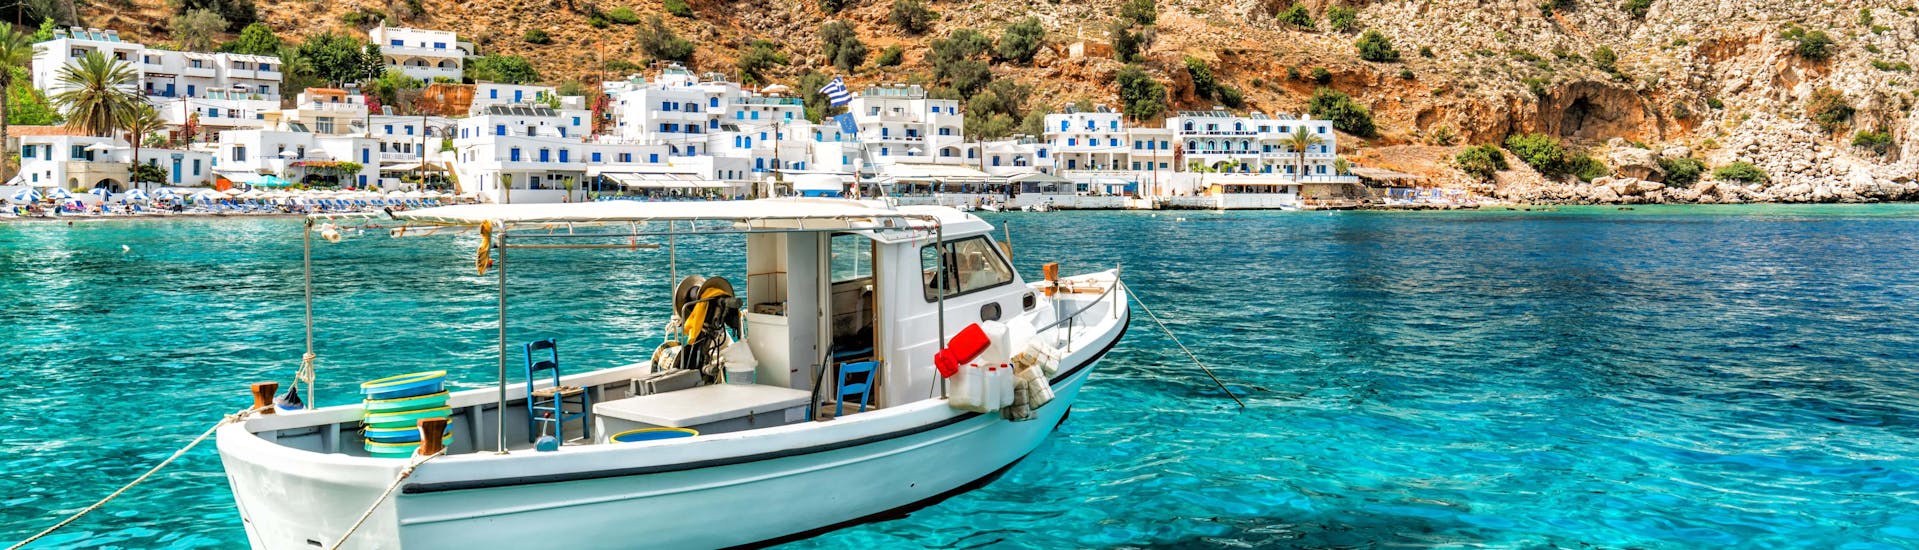 A boat on the crystal clear water in front of the coast of Crete, a popular destination for boat trips. 